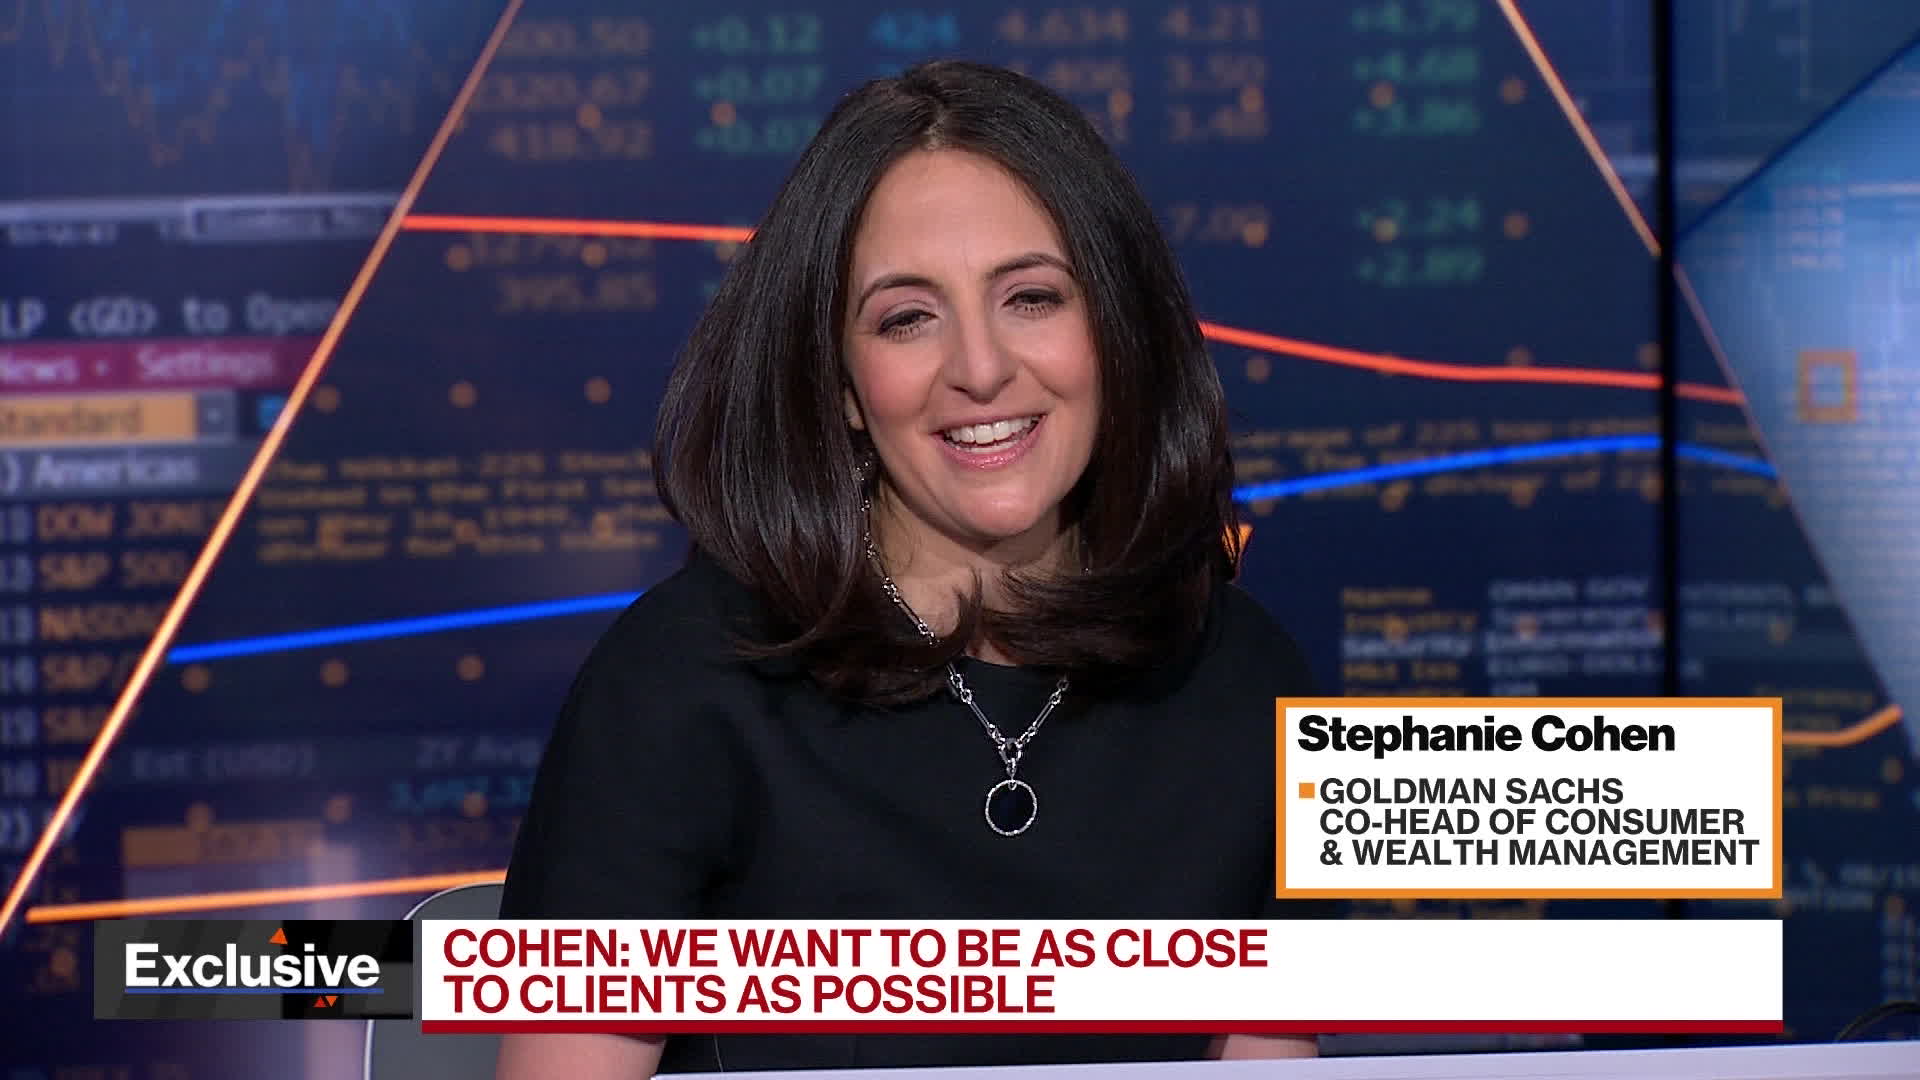 Watch State of the Consumer: Goldman Sachs Stephanie Cohen - Bloomberg